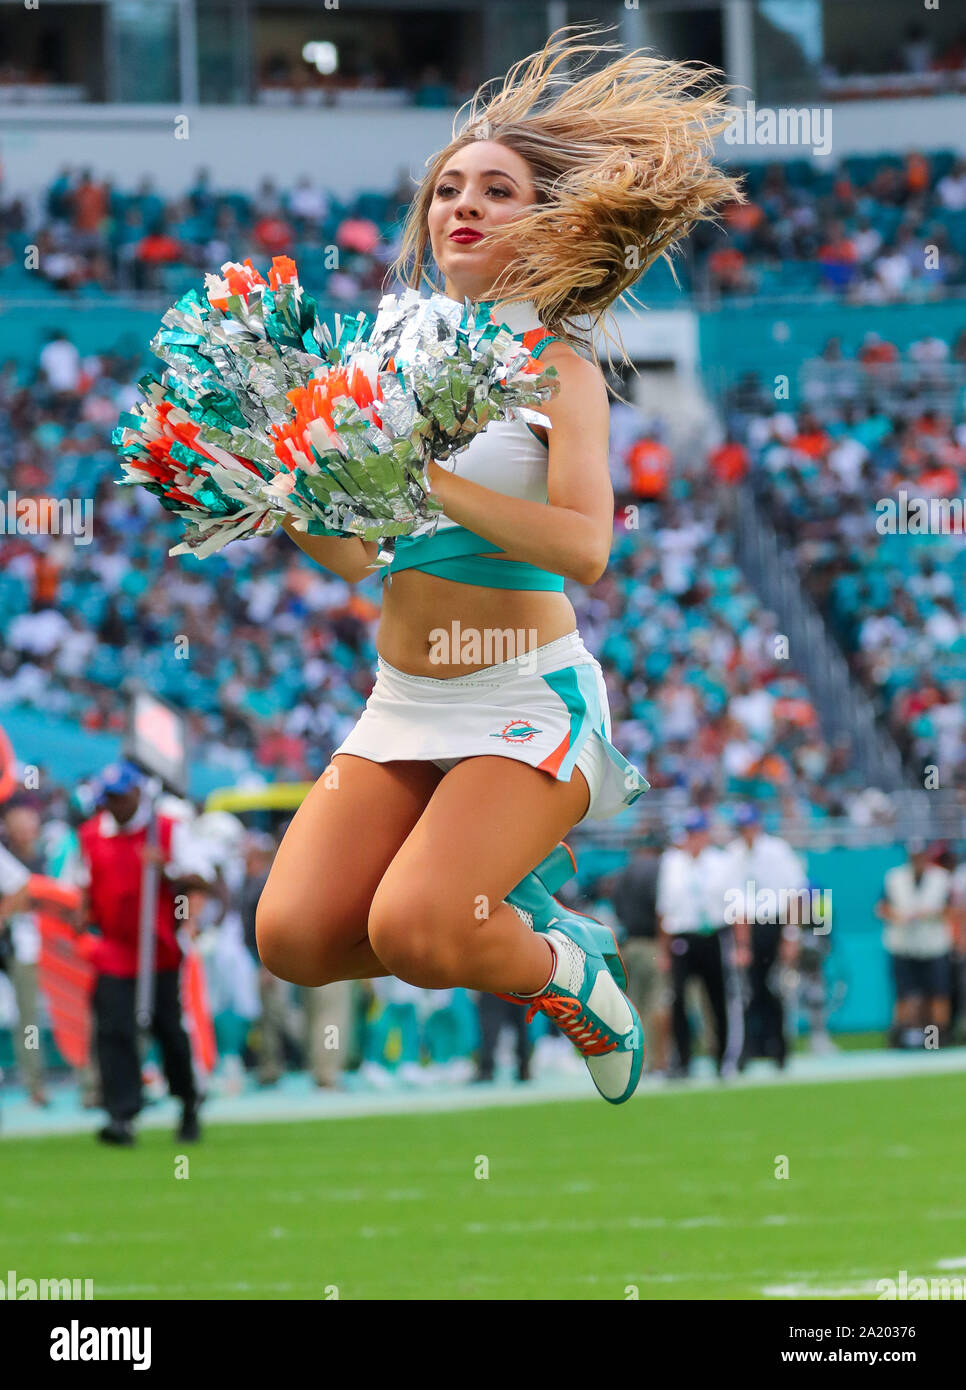 Miami Gardens, Florida, USA. 29th Sep, 2019. A Miami Dolphins cheerleader performs during an NFL football game between Los Angeles Chargers and the Miami Dolphins at the Hard Rock Stadium in Miami Gardens, Florida. Credit: Mario Houben/ZUMA Wire/Alamy Live News Stock Photo